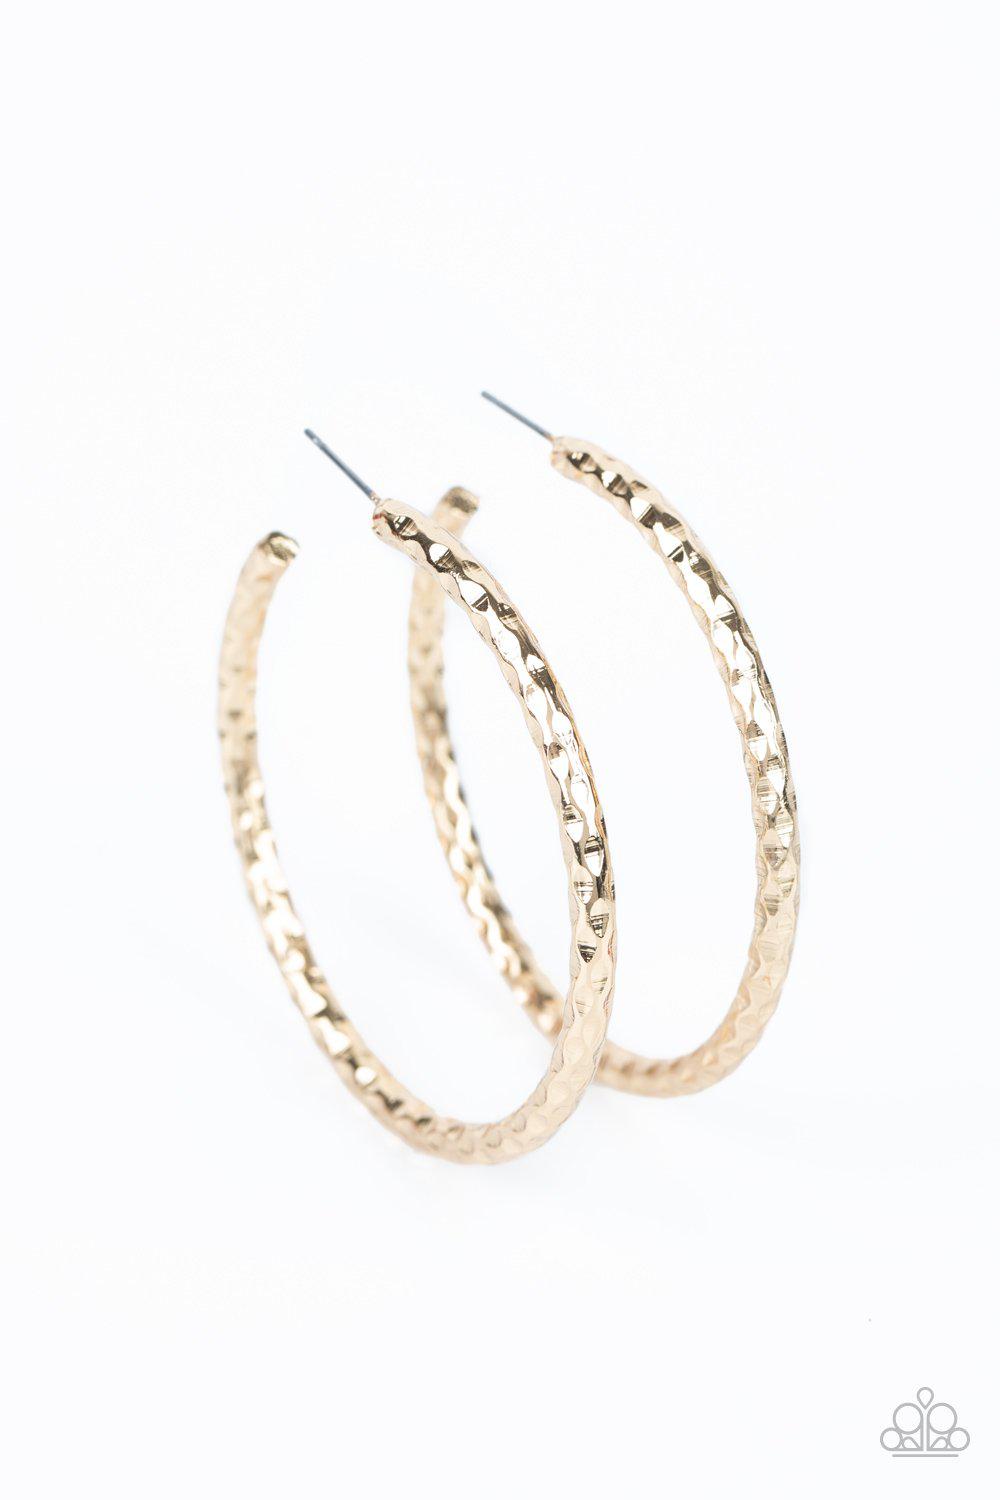 Urban Upgrade Hammered Gold Hoop Earrings - Paparazzi Accessories- lightbox - CarasShop.com - $5 Jewelry by Cara Jewels